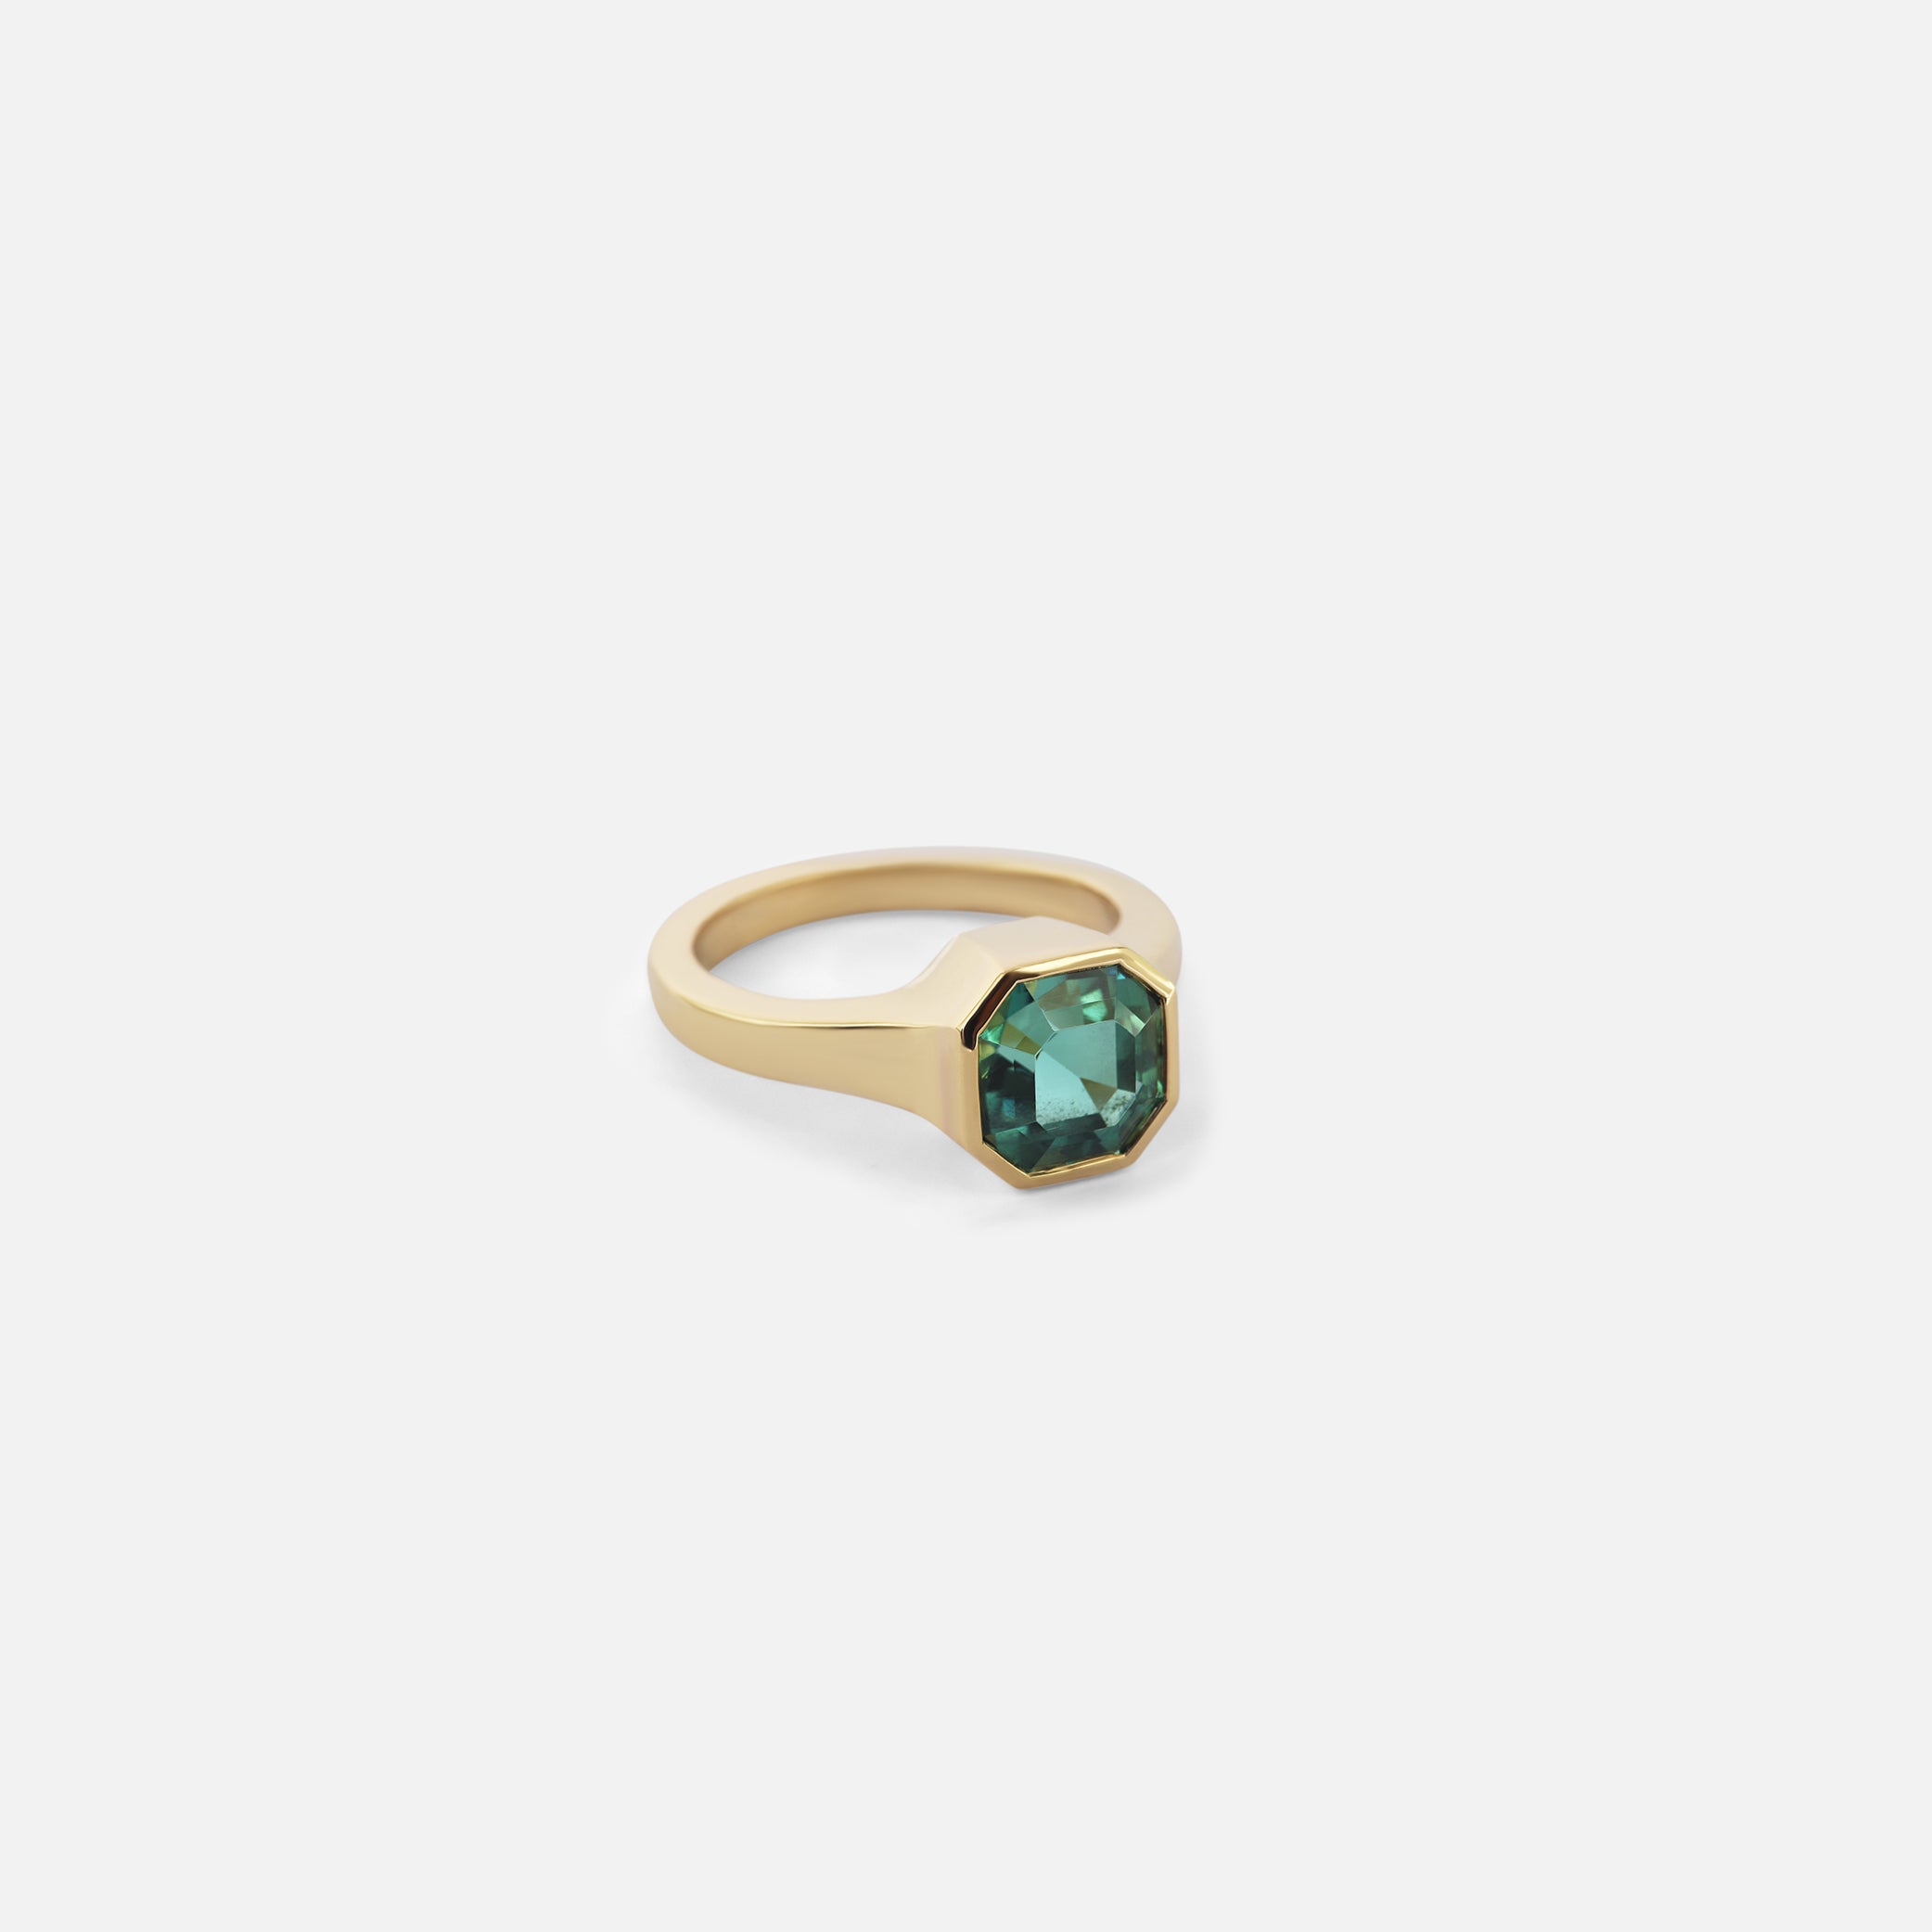 Blue and Green Tourmaline Ring By Bree Altman in Engagement Rings Category